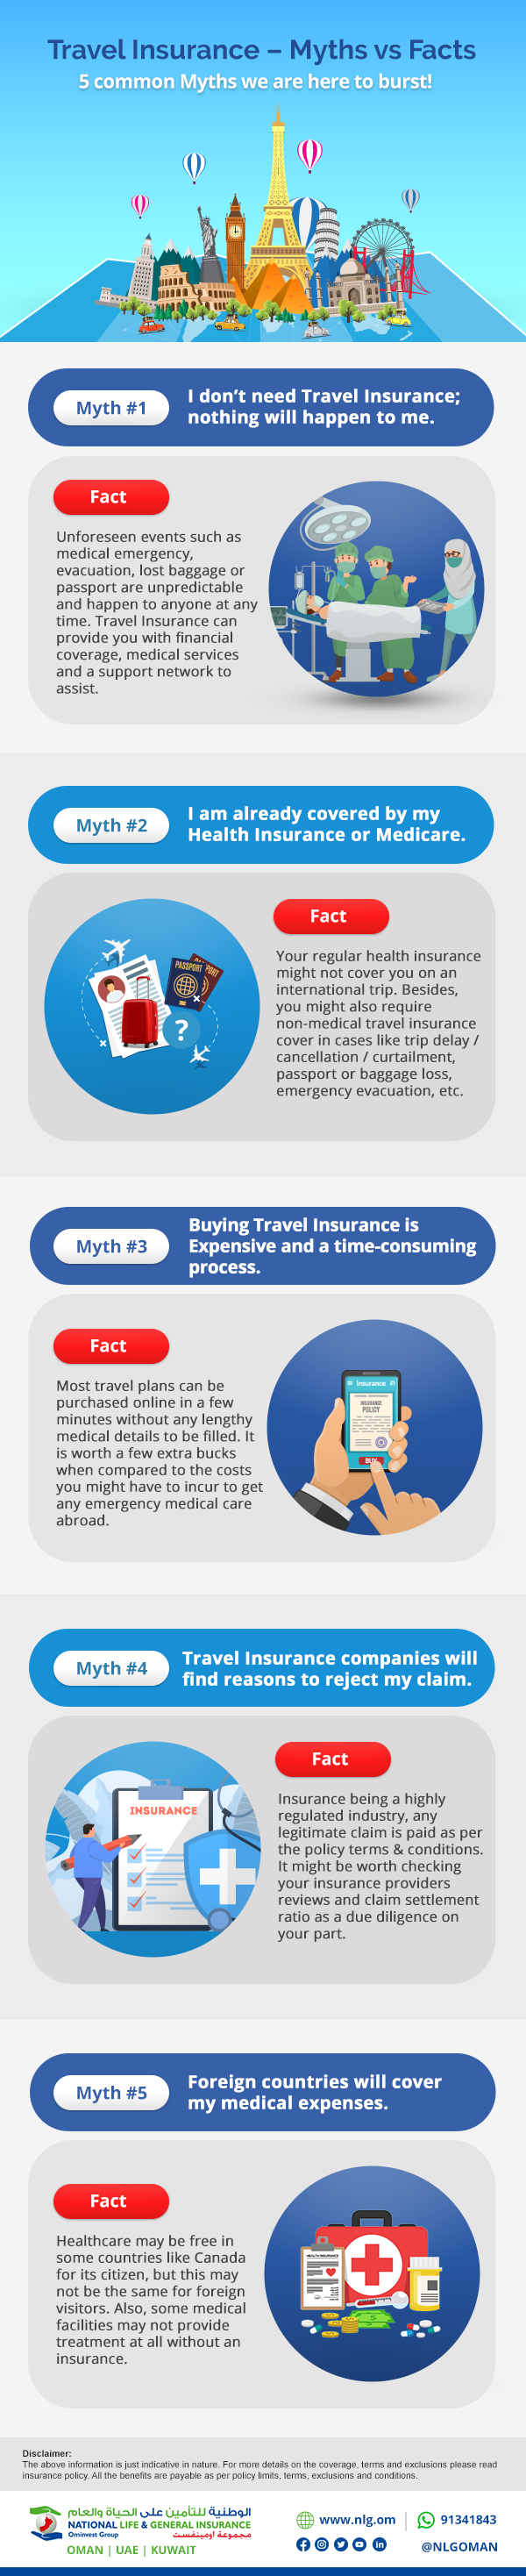 Travel Insurance - Myths vs Facts [Infographic]